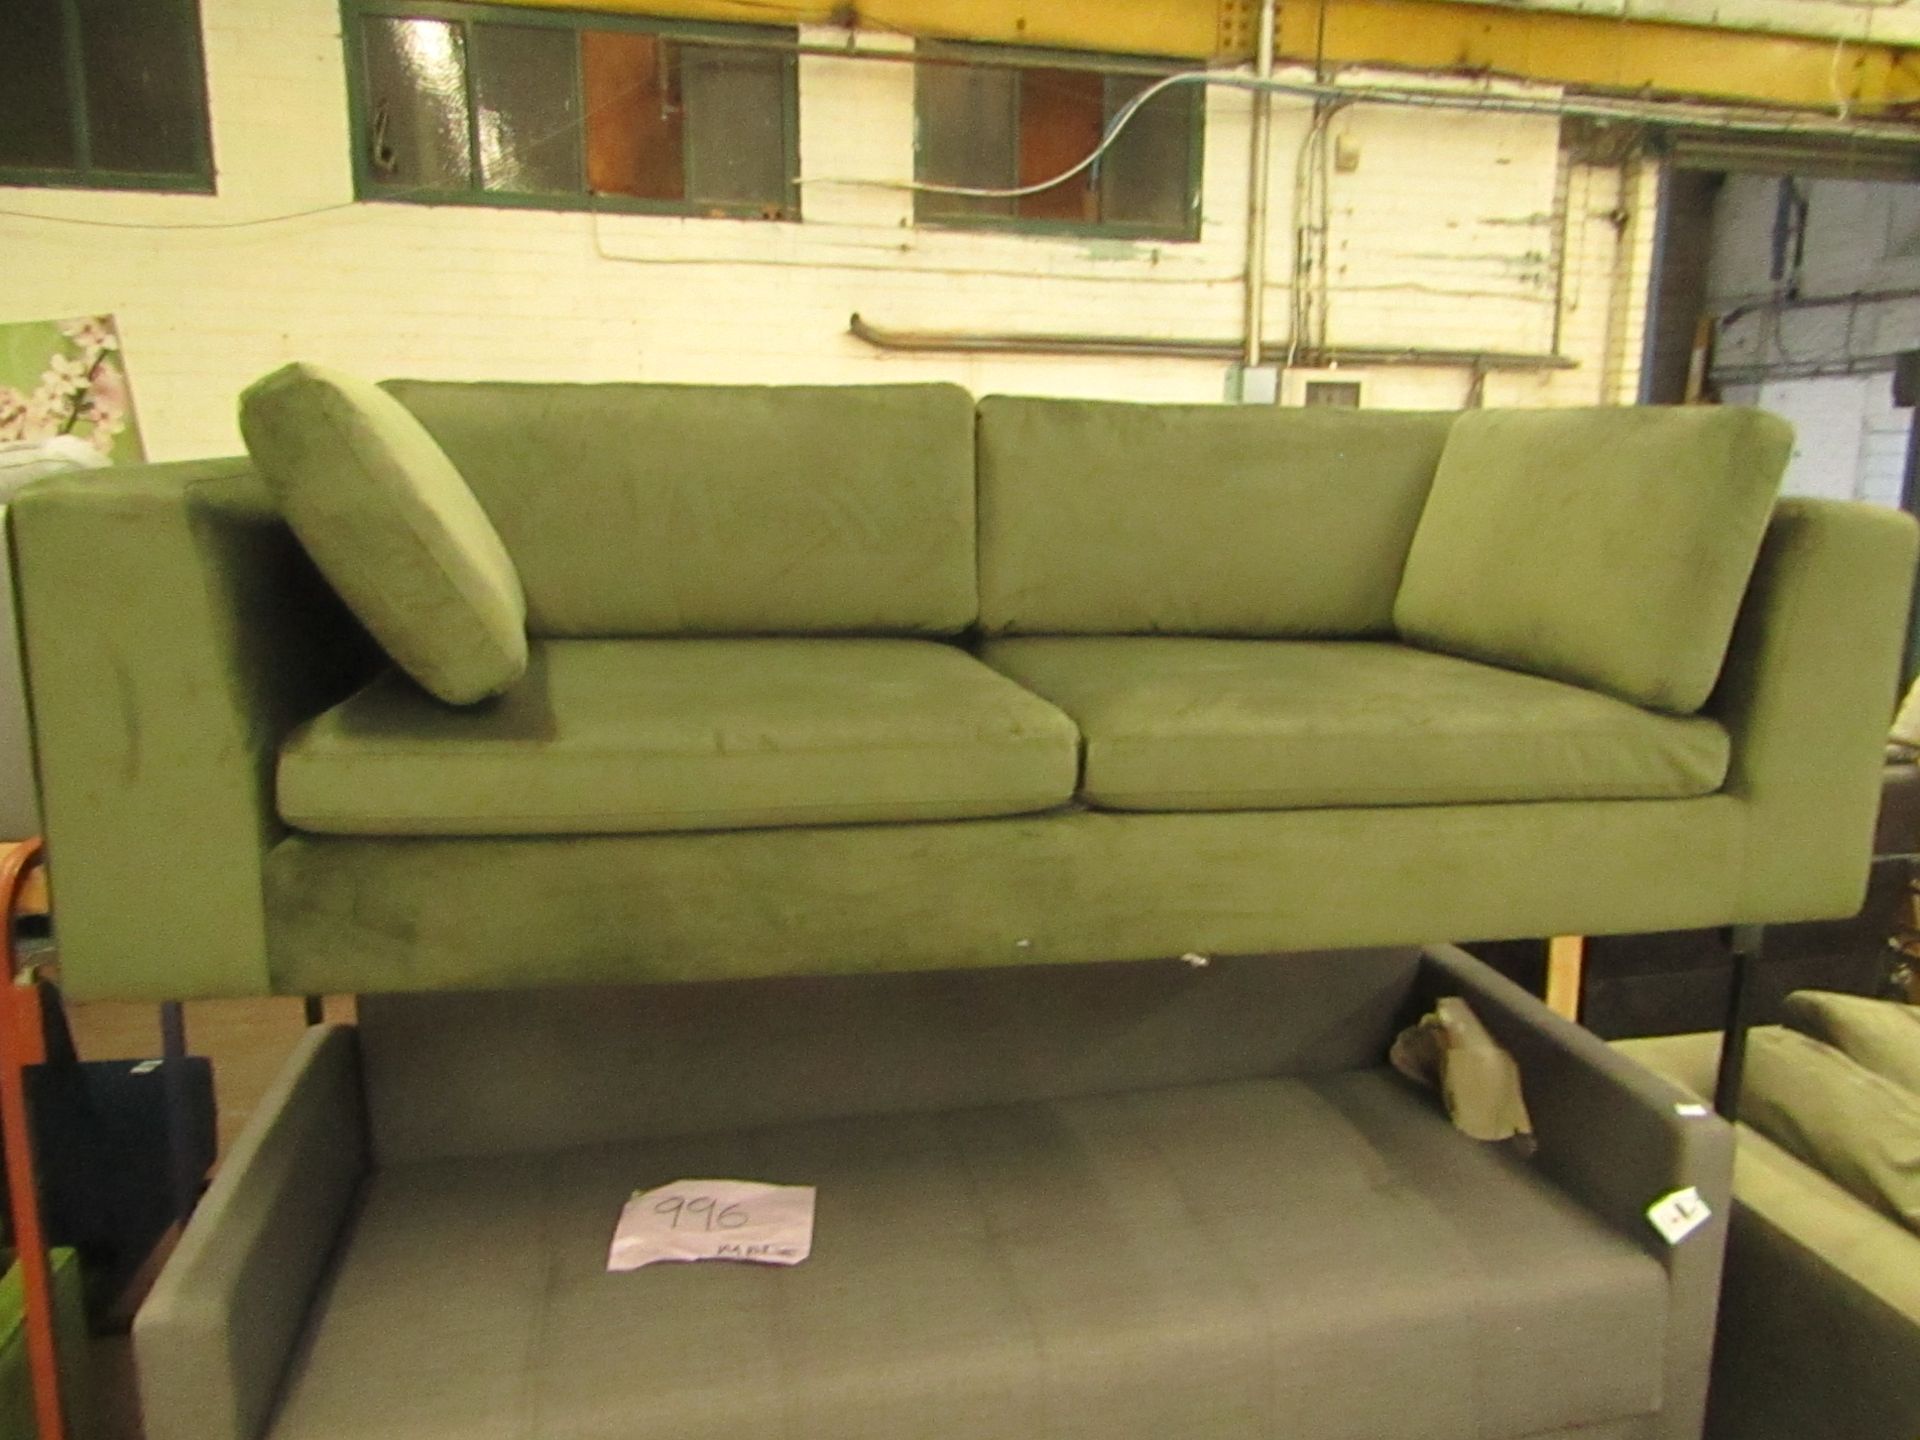 | 1X | MADE.COM 3 SEATER SOFA GREEN VELVET | ITEM HAS A SMALL RIP ON THE BOTTOM FRONT EDGE | VIEWING